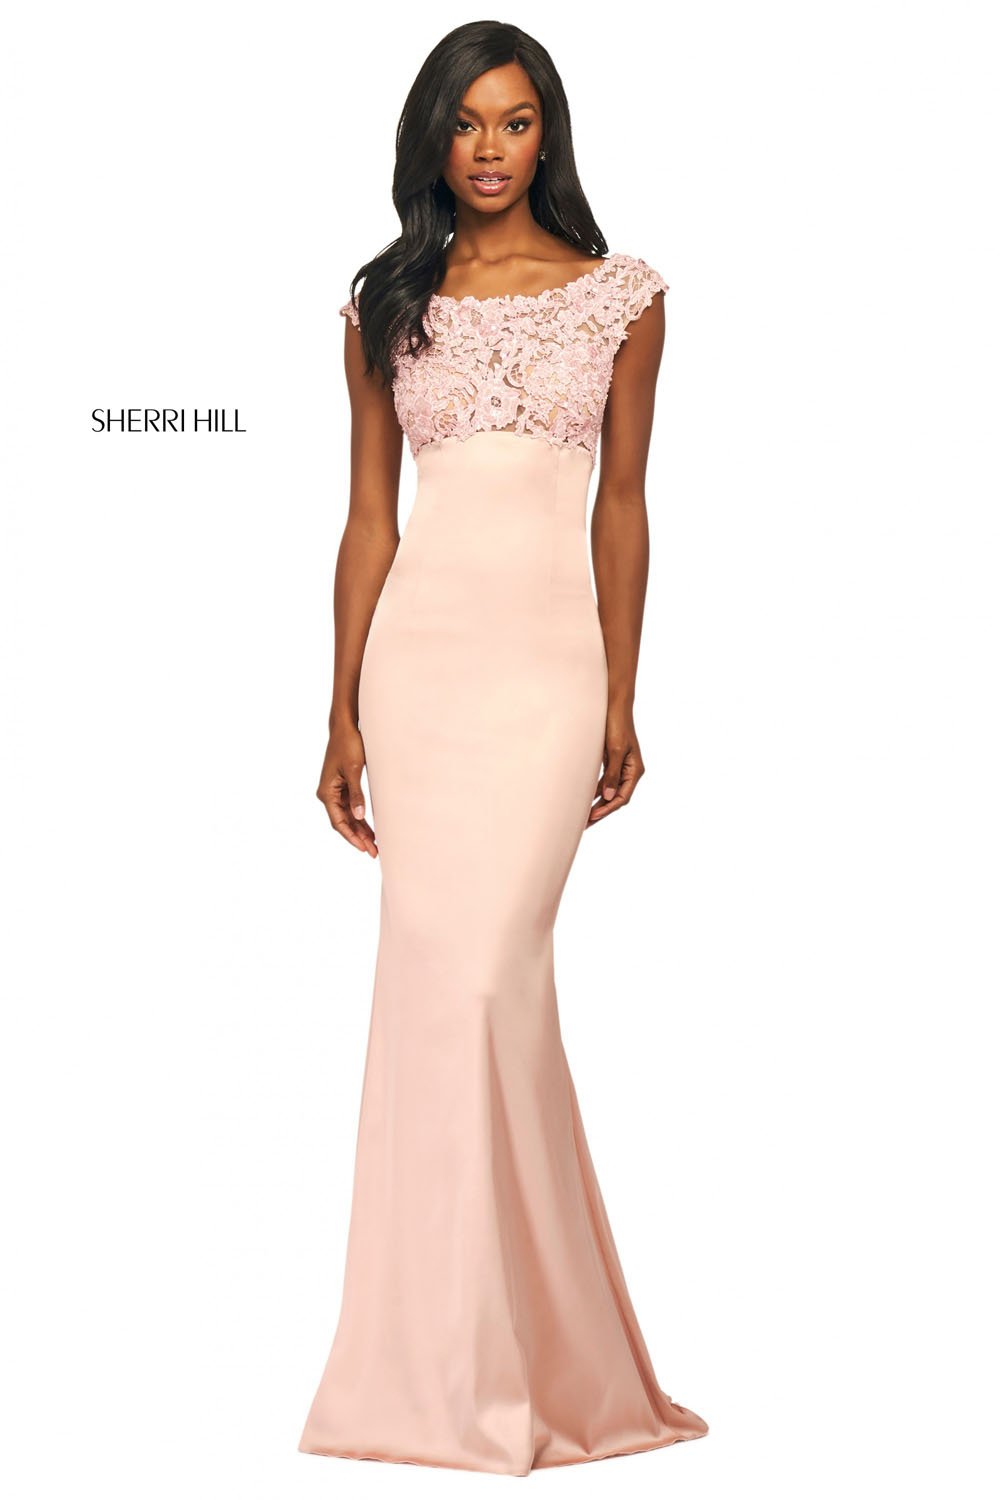 Sherri Hill 53605 dress images in these colors: Navy, Ruby, Blush, Black, Red, Royal, Rose.